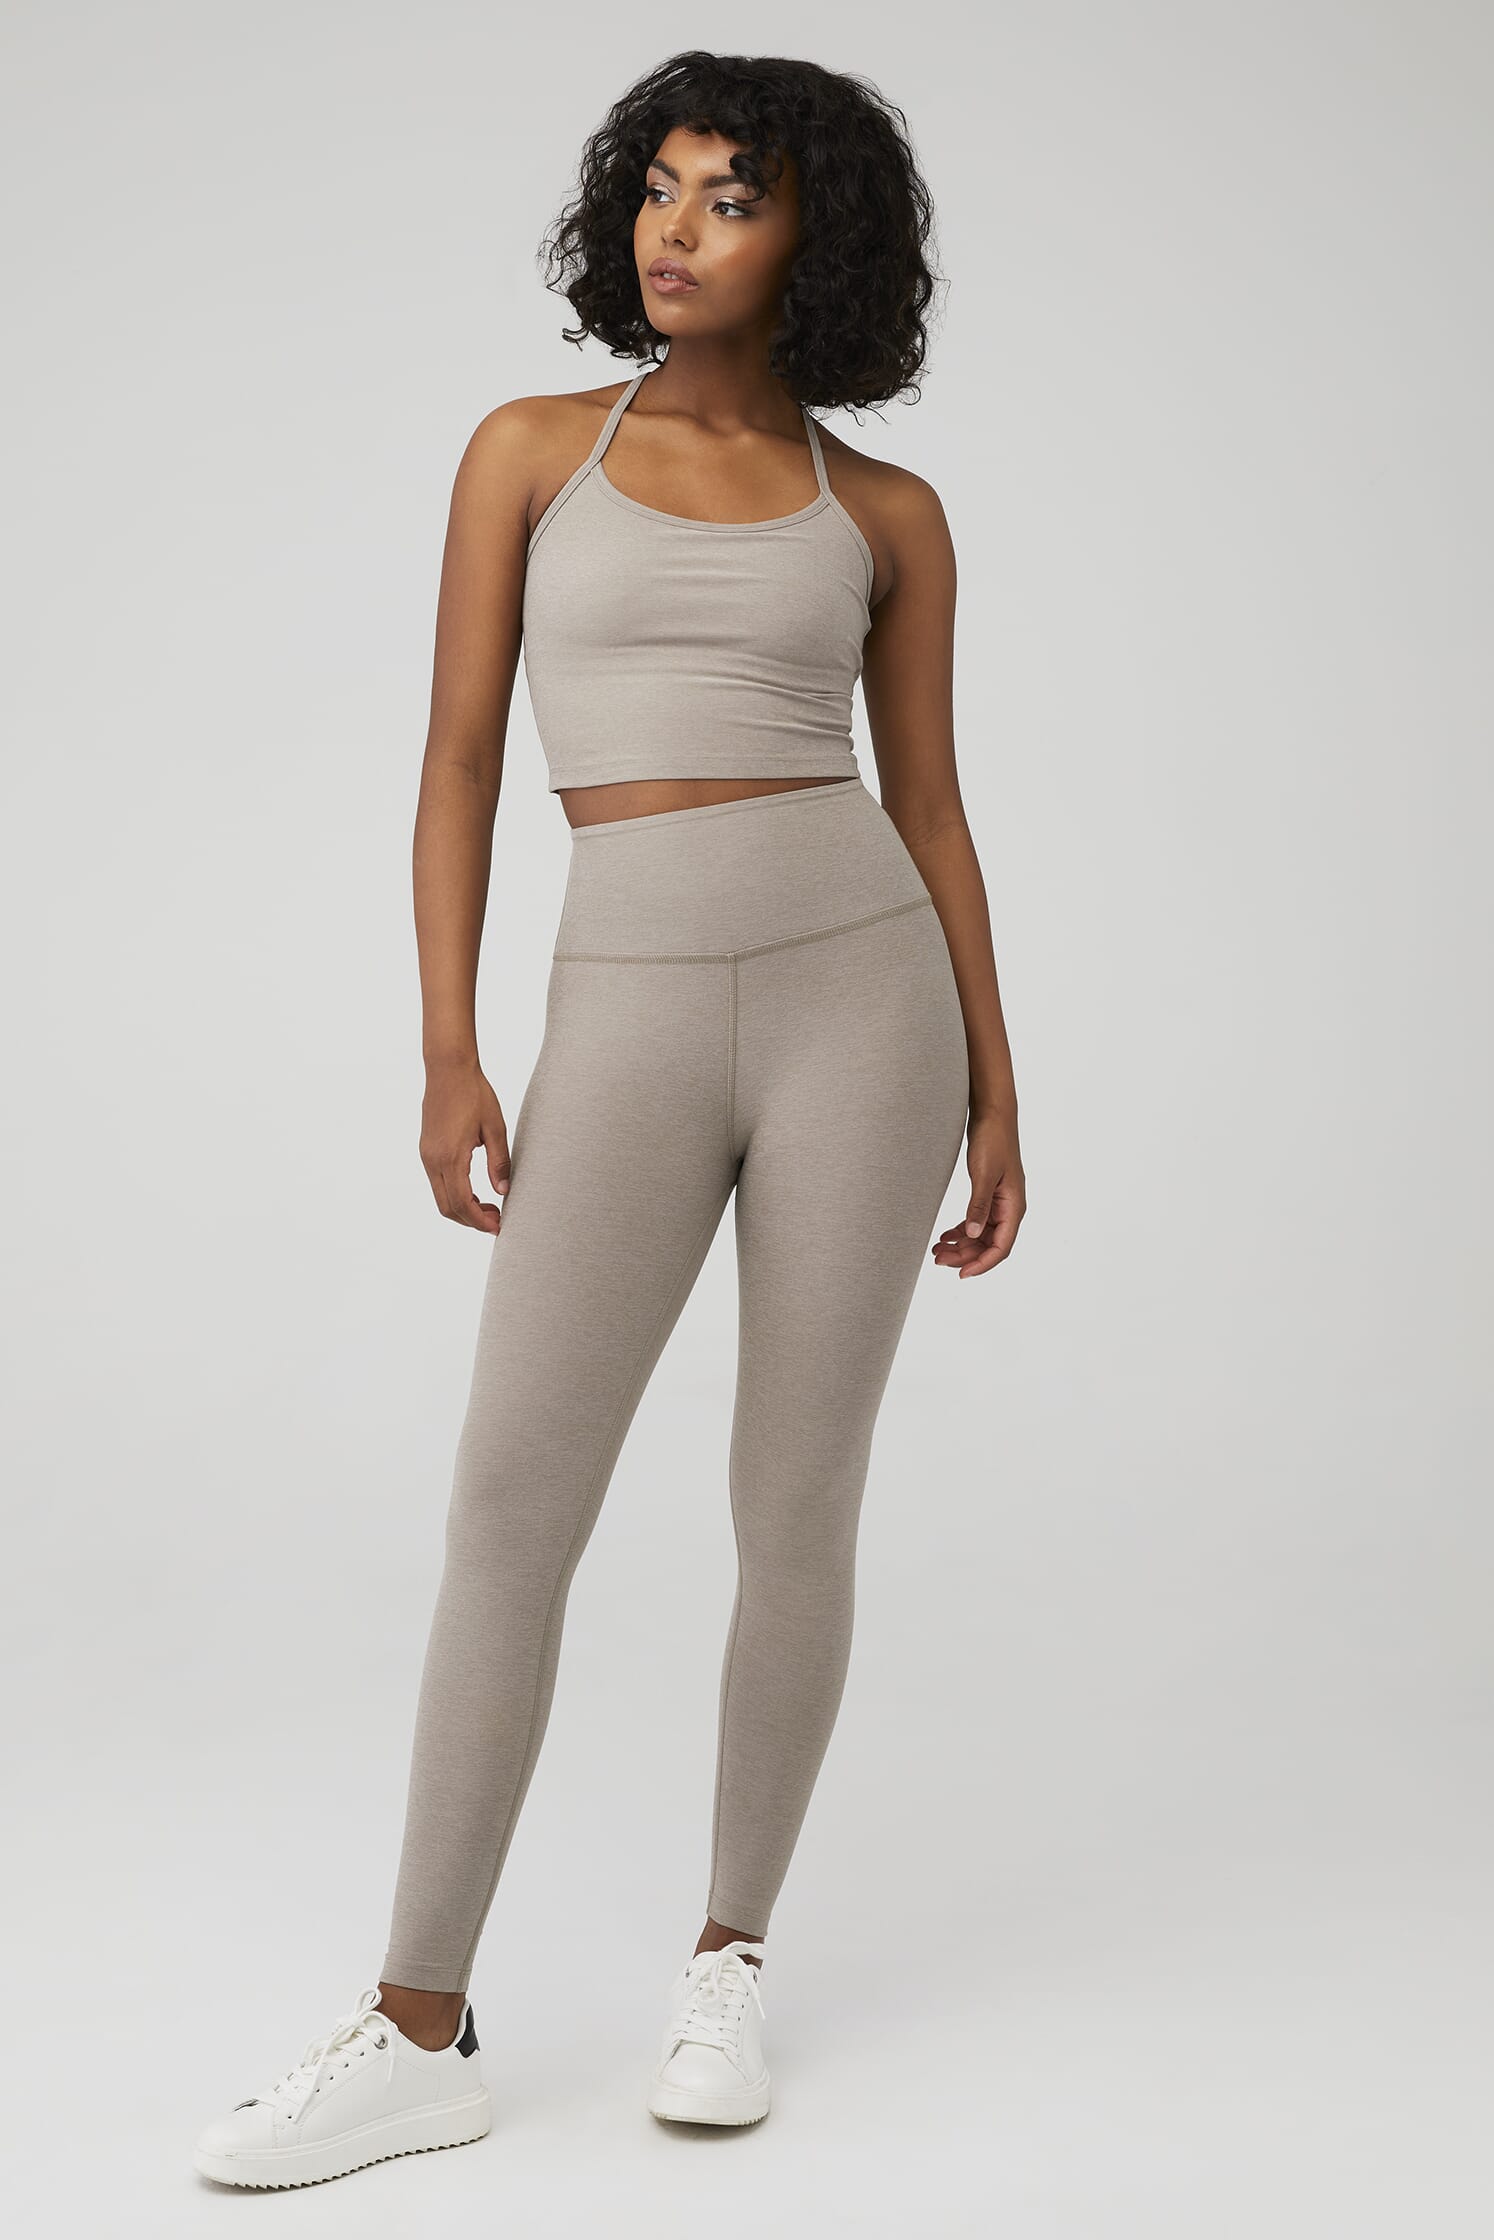 https://images.fashionpass.com/products/spacedye-caught-in-the-midi-high-waisted-legging-beyond-yoga-birch-heather-1b3-4.jpg?profile=a